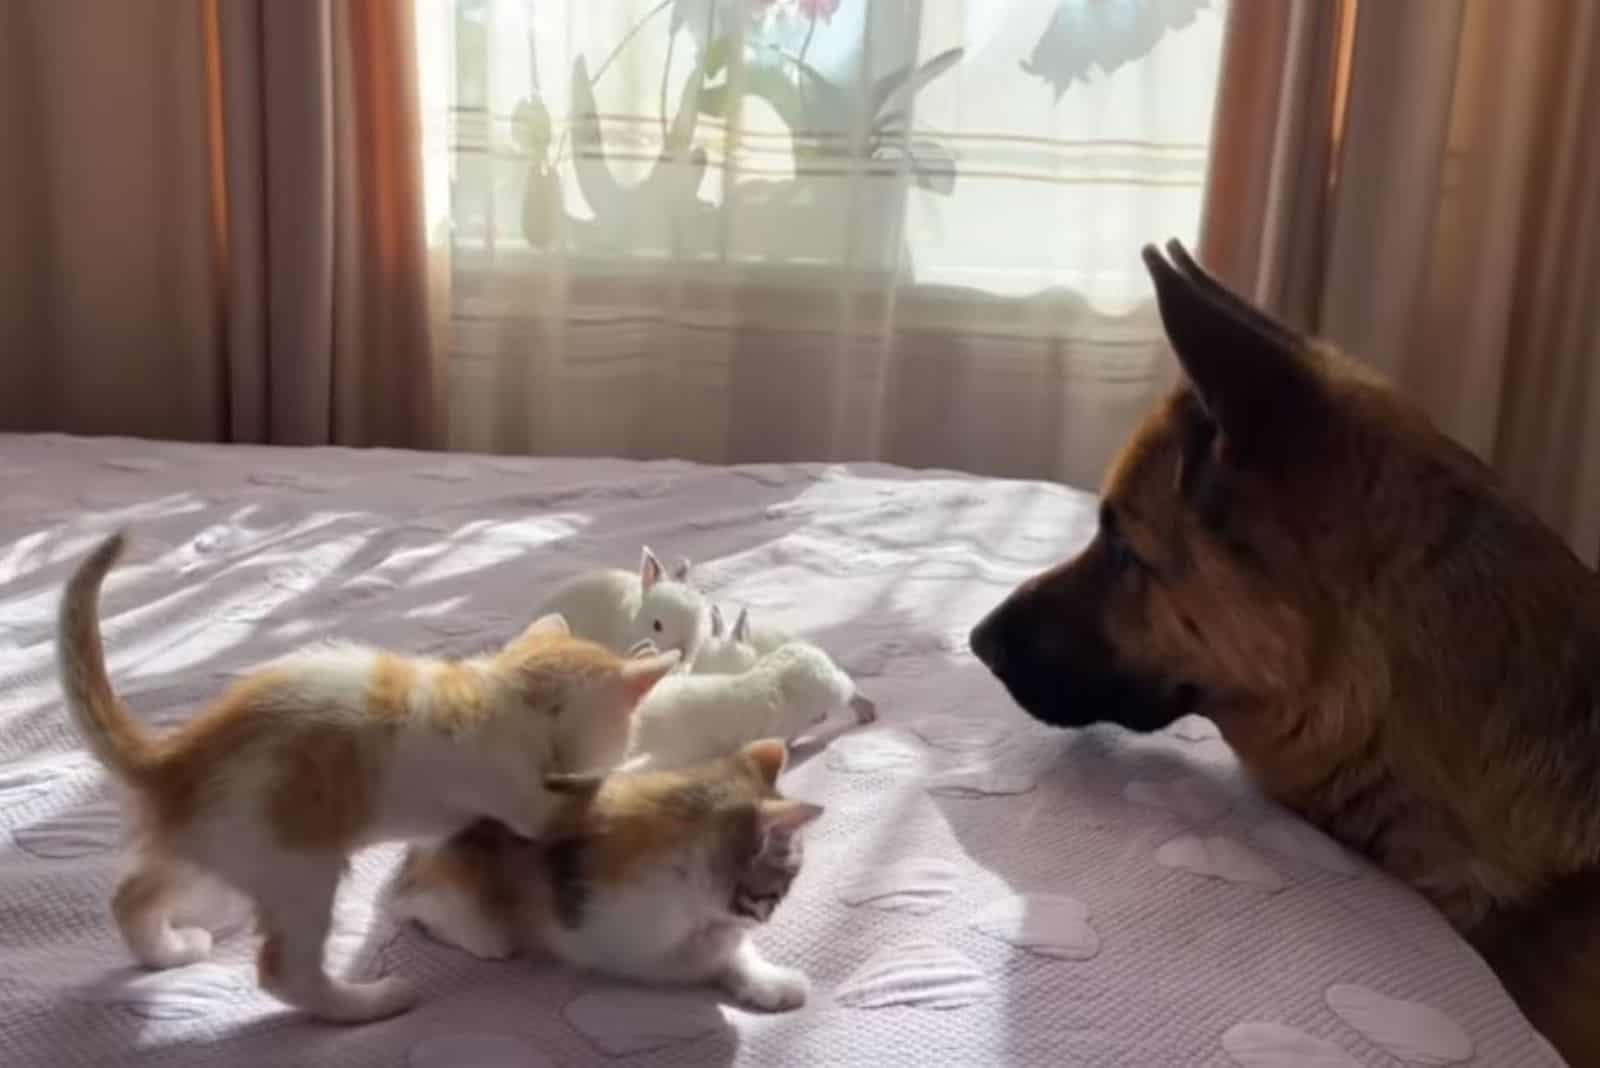 german shepherd dog looking at tinny bunnies and kittens on the bed